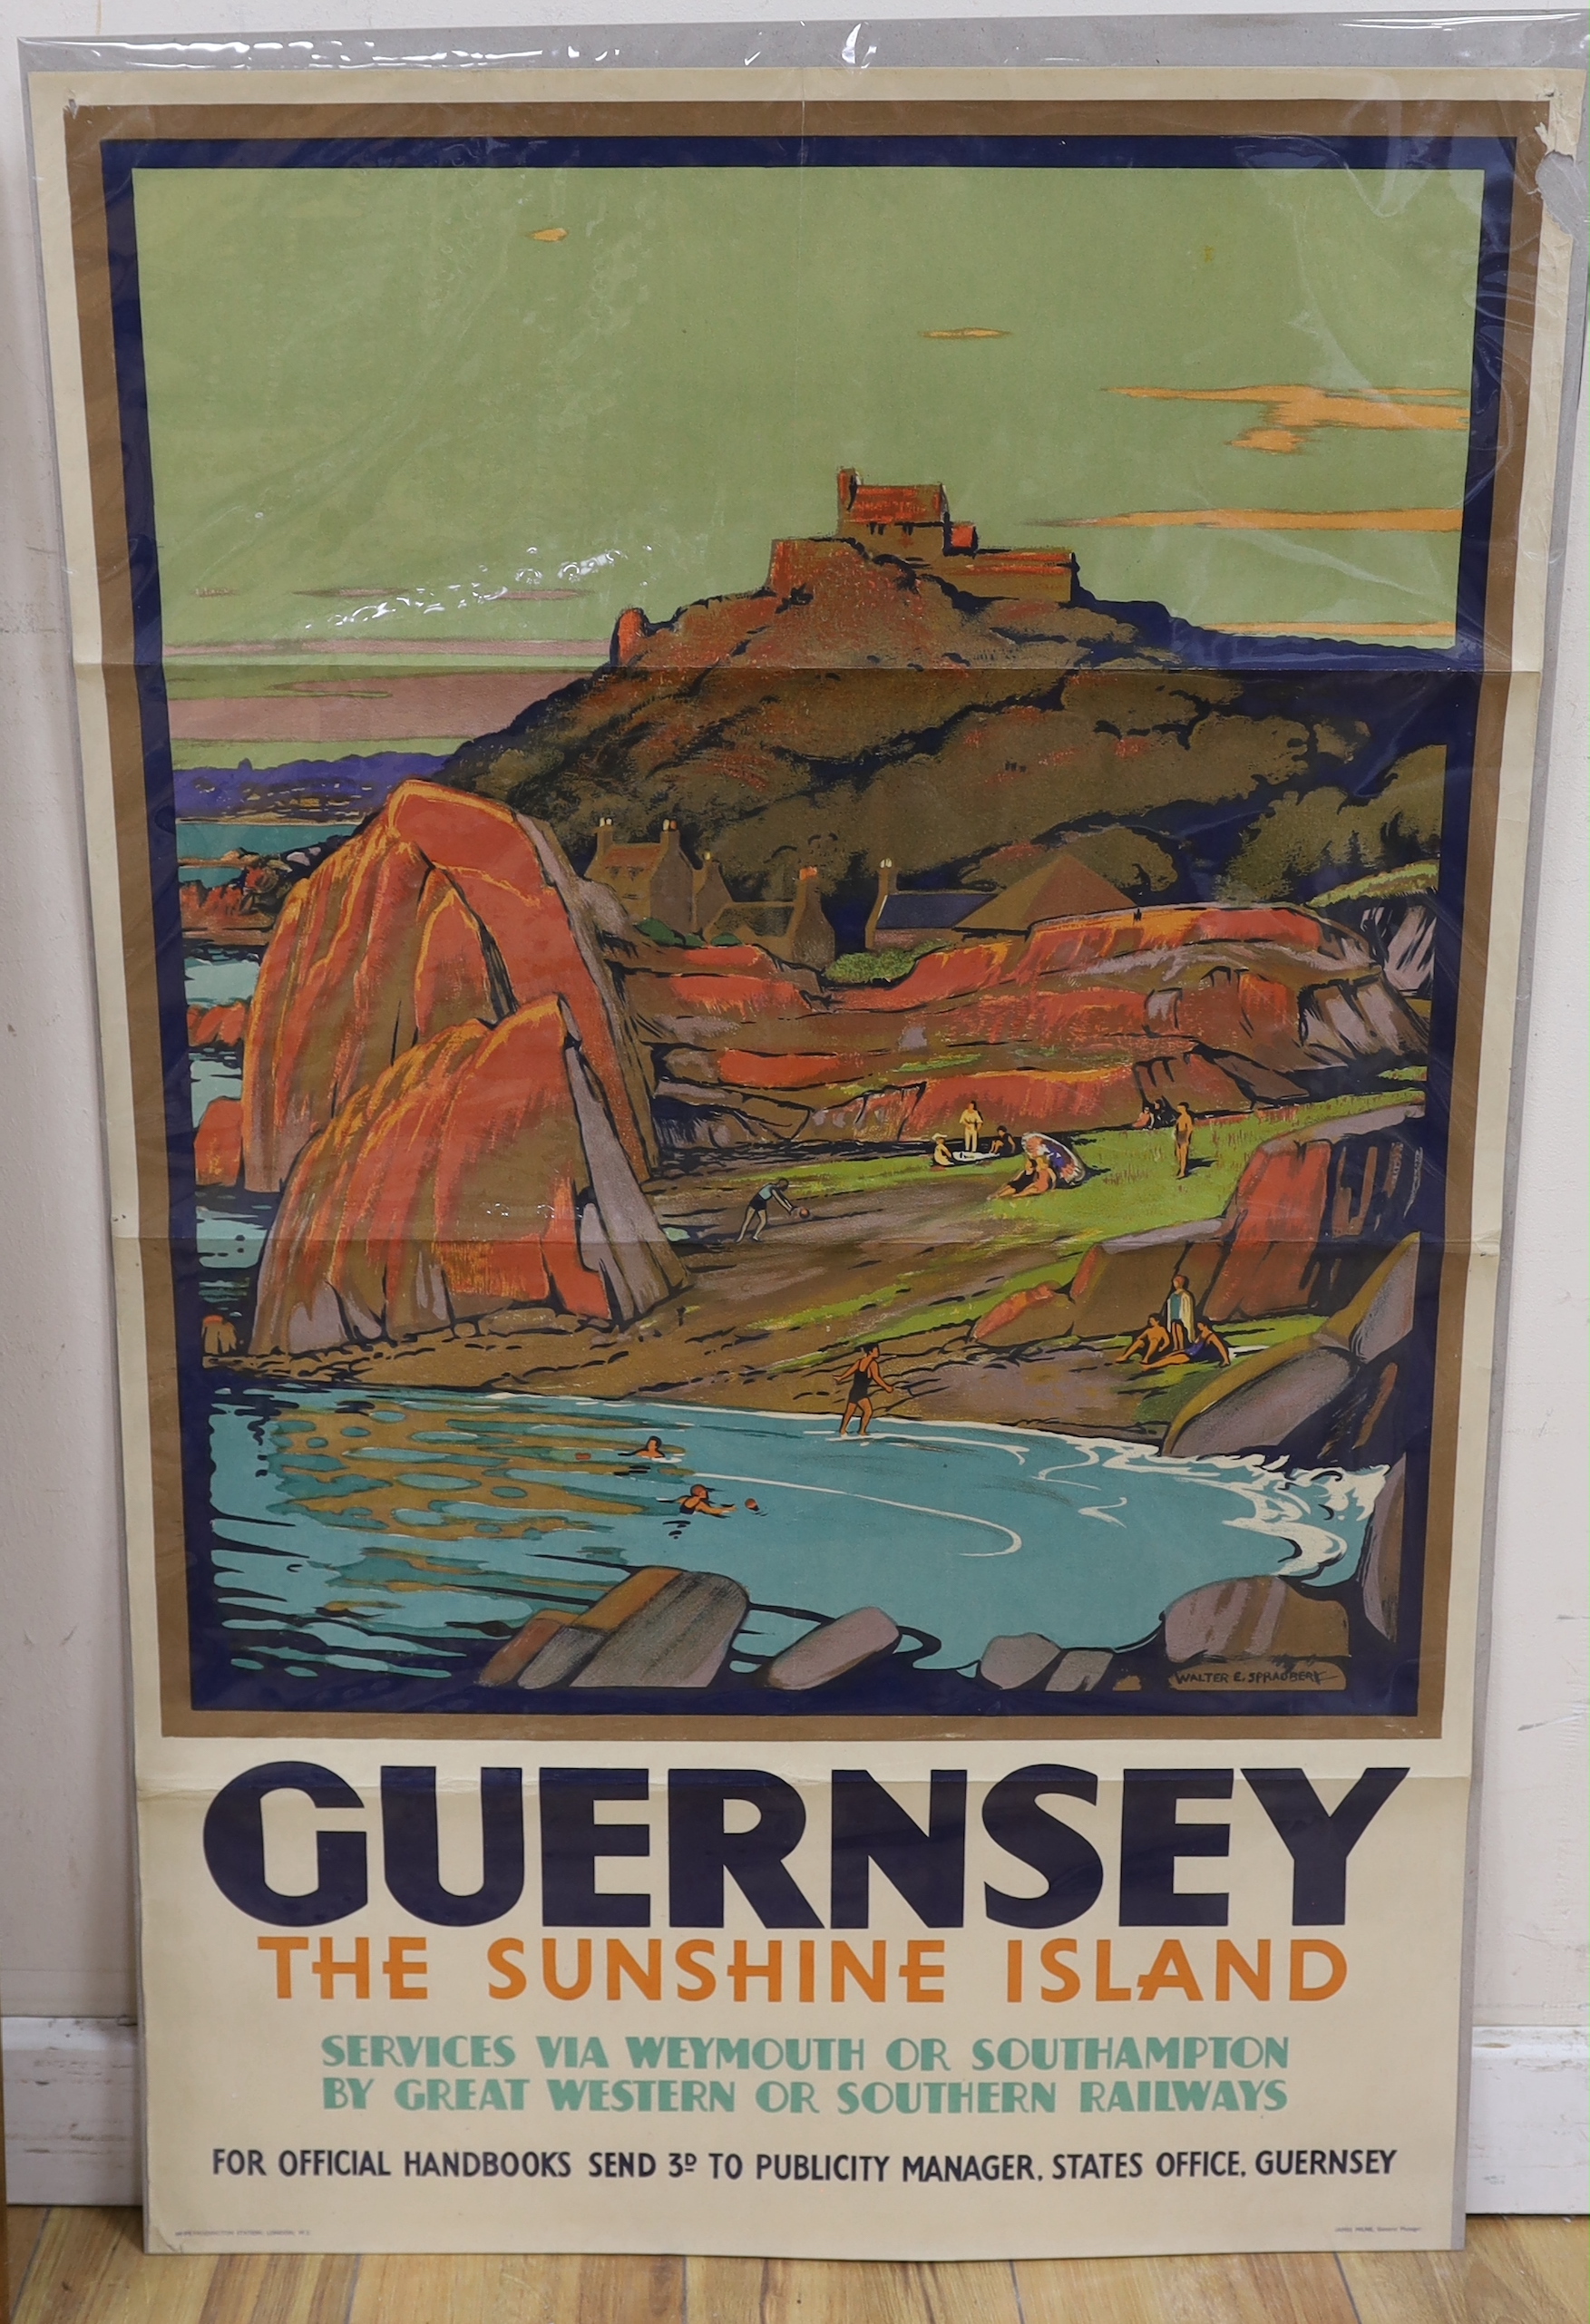 Walter Ernest Spradbery (1889-1969), lithographic railway poster, 'Guernsey - The Sunshine - Image 2 of 2